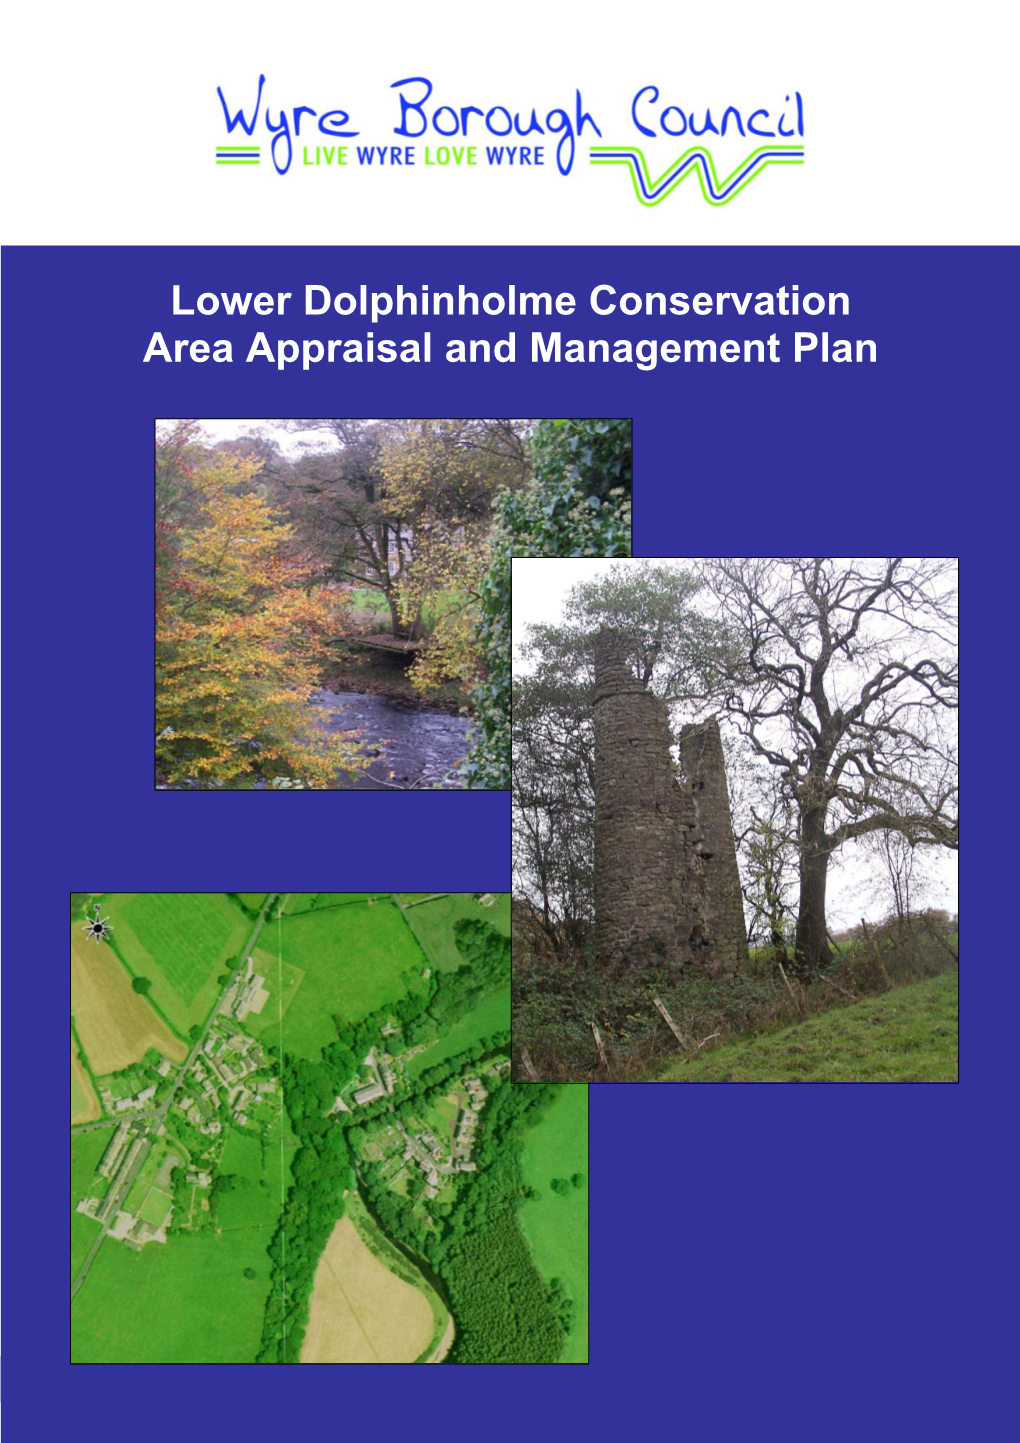 Lower Dolphinholme Conservation Area Appraisal and Management Plan